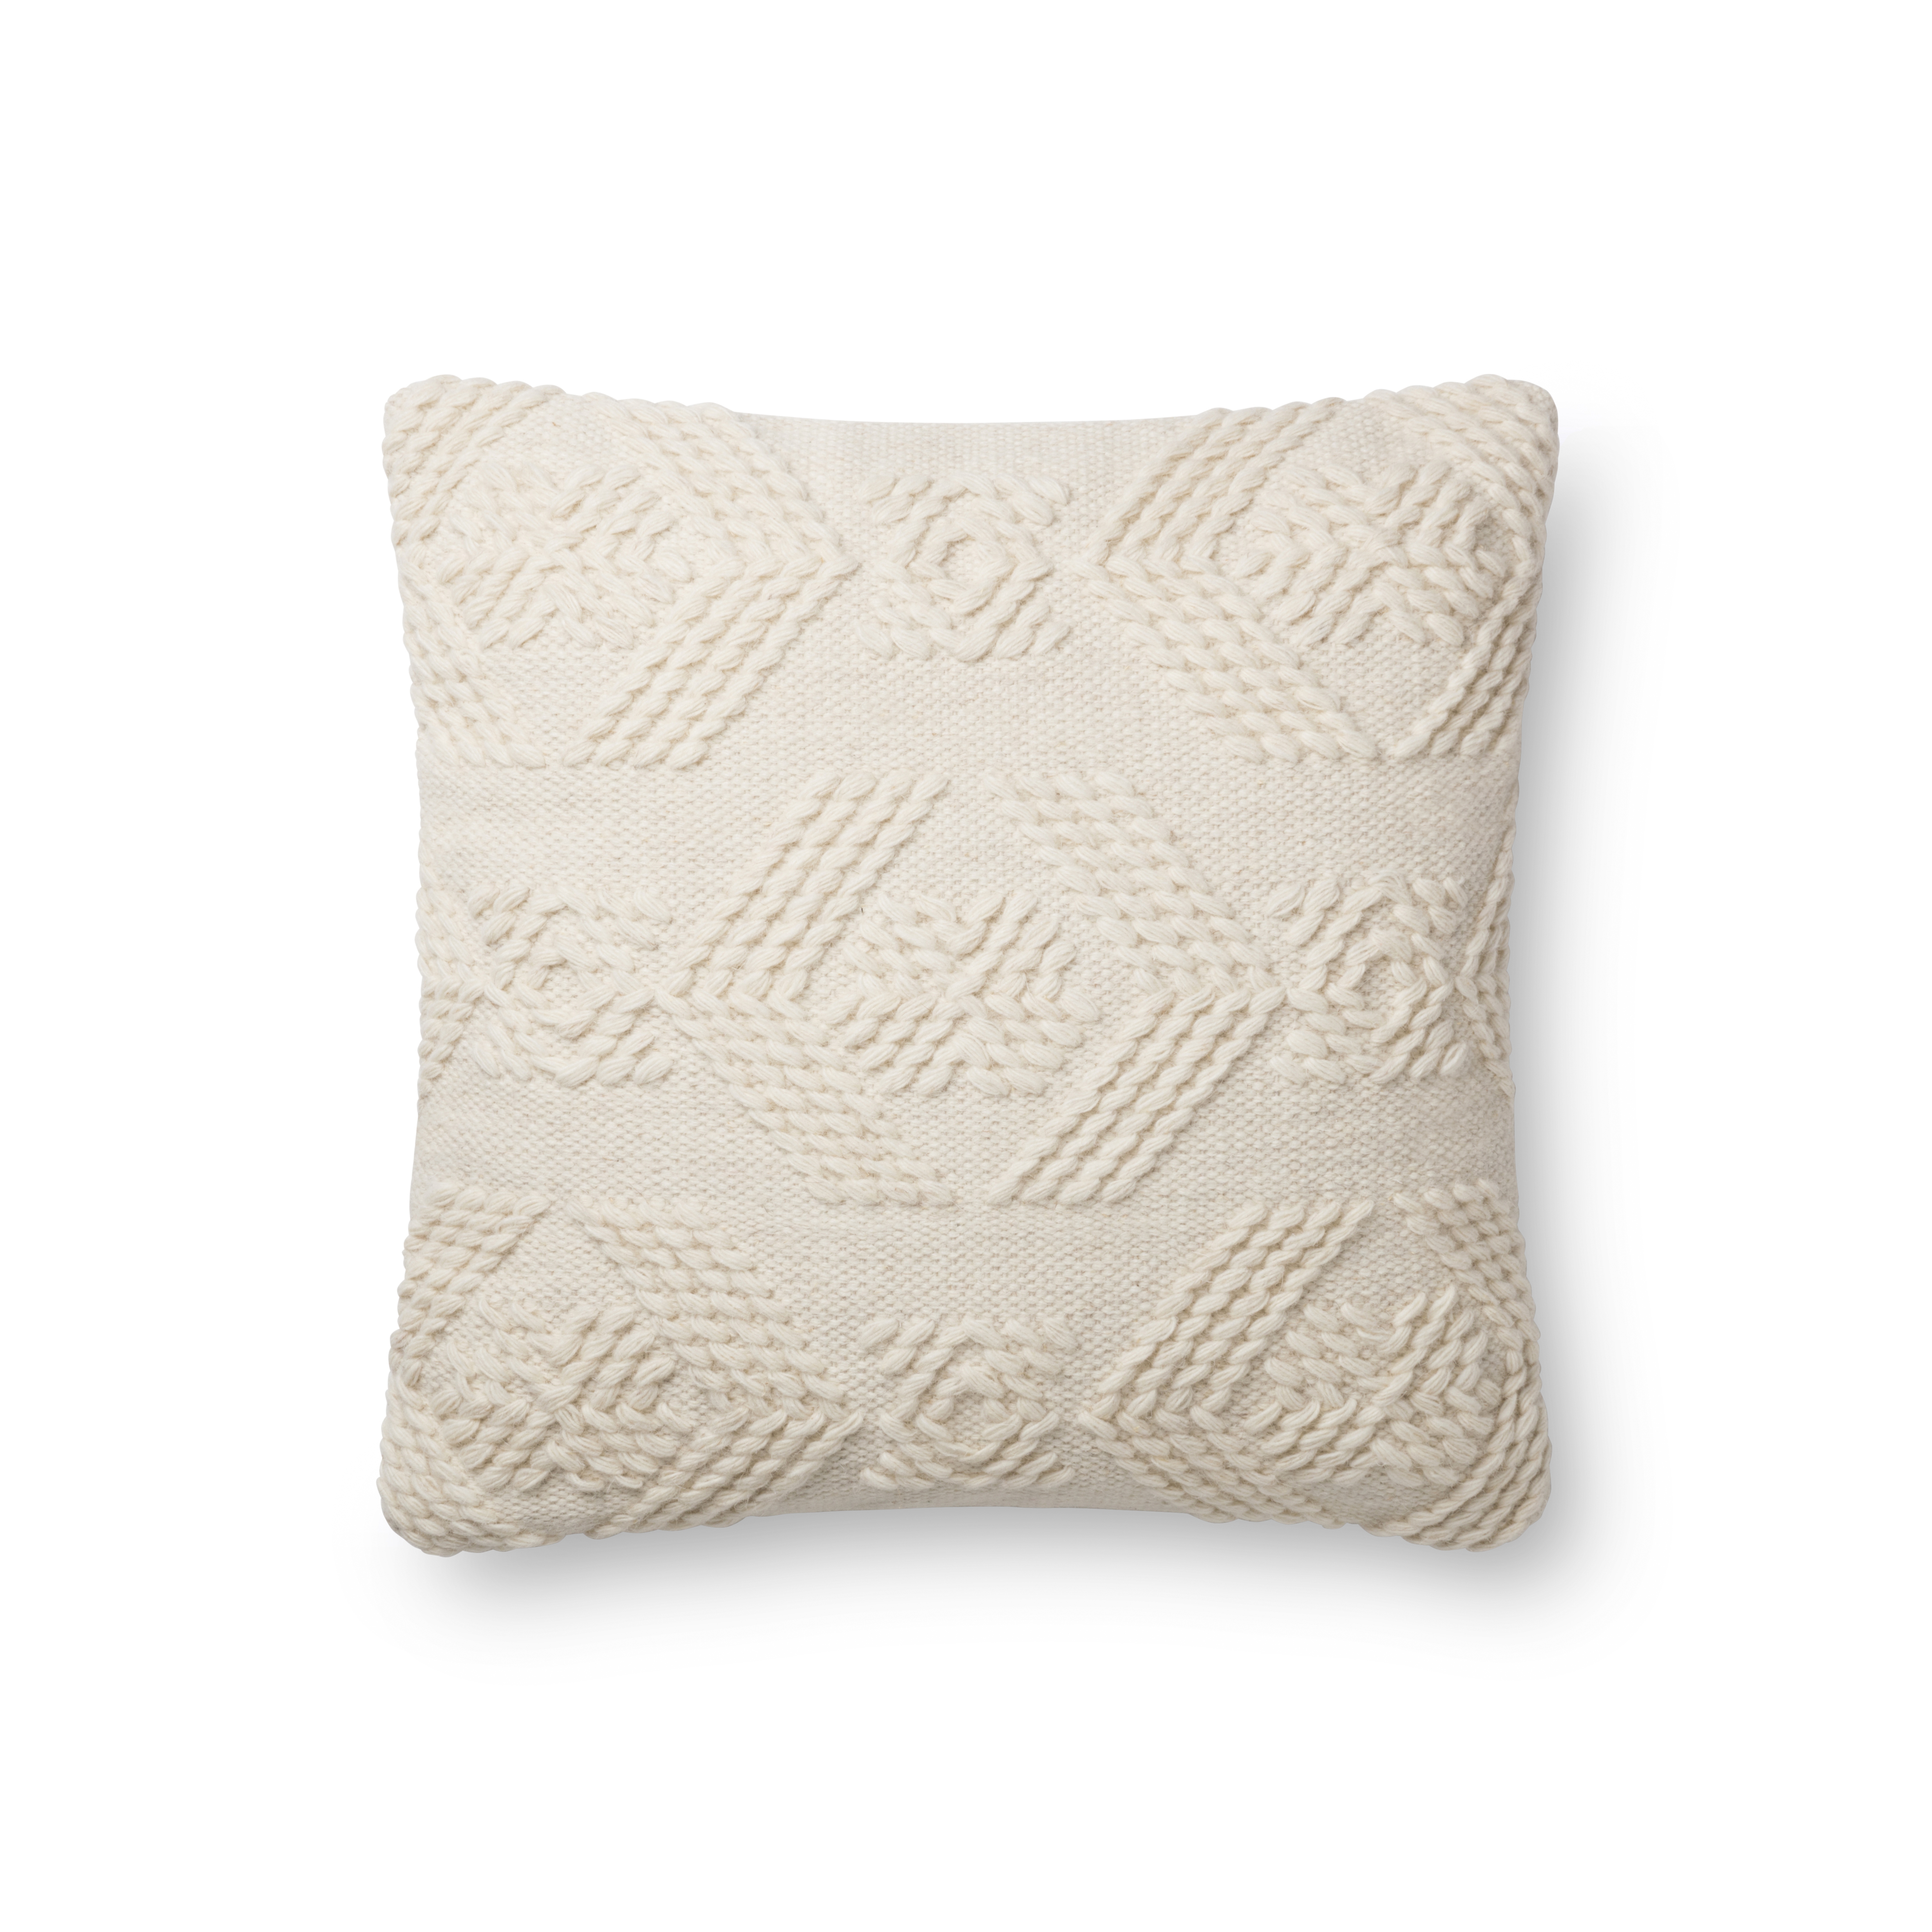 Magnolia Home by Joanna Gaines PILLOWS P1105 IVORY / IVORY 13" x 35" Cover Only - Loloi Rugs